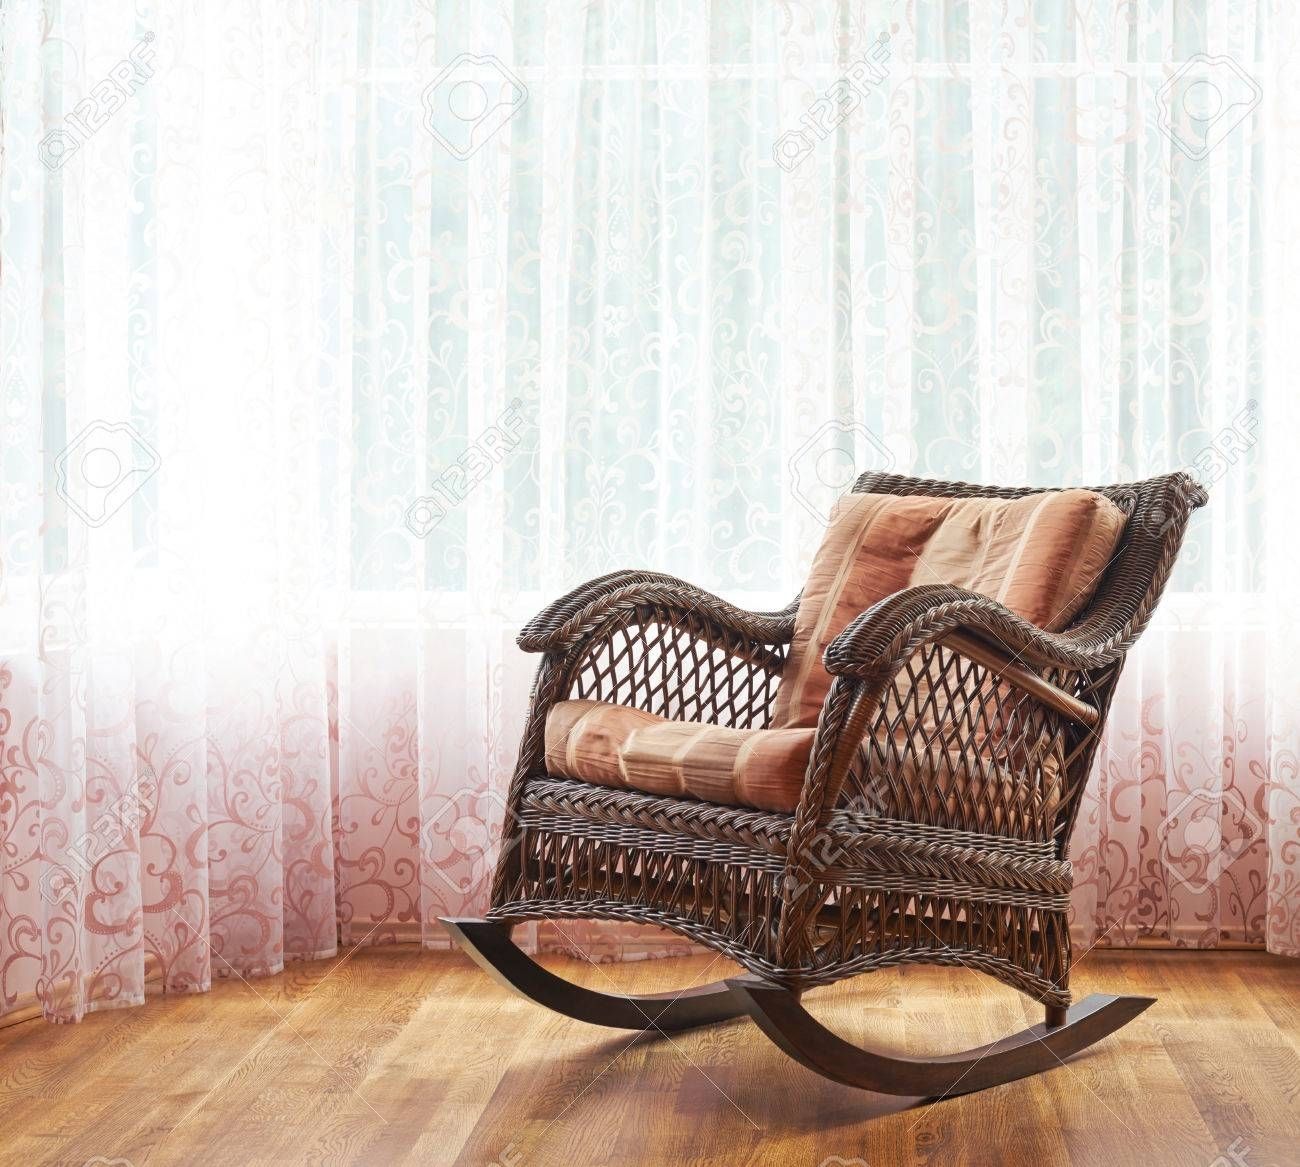 Brown Wicker Rocking Chair Against The Window's Curtains, Indoor Within Indoor Wicker Rocking Chairs (Photo 15 of 15)